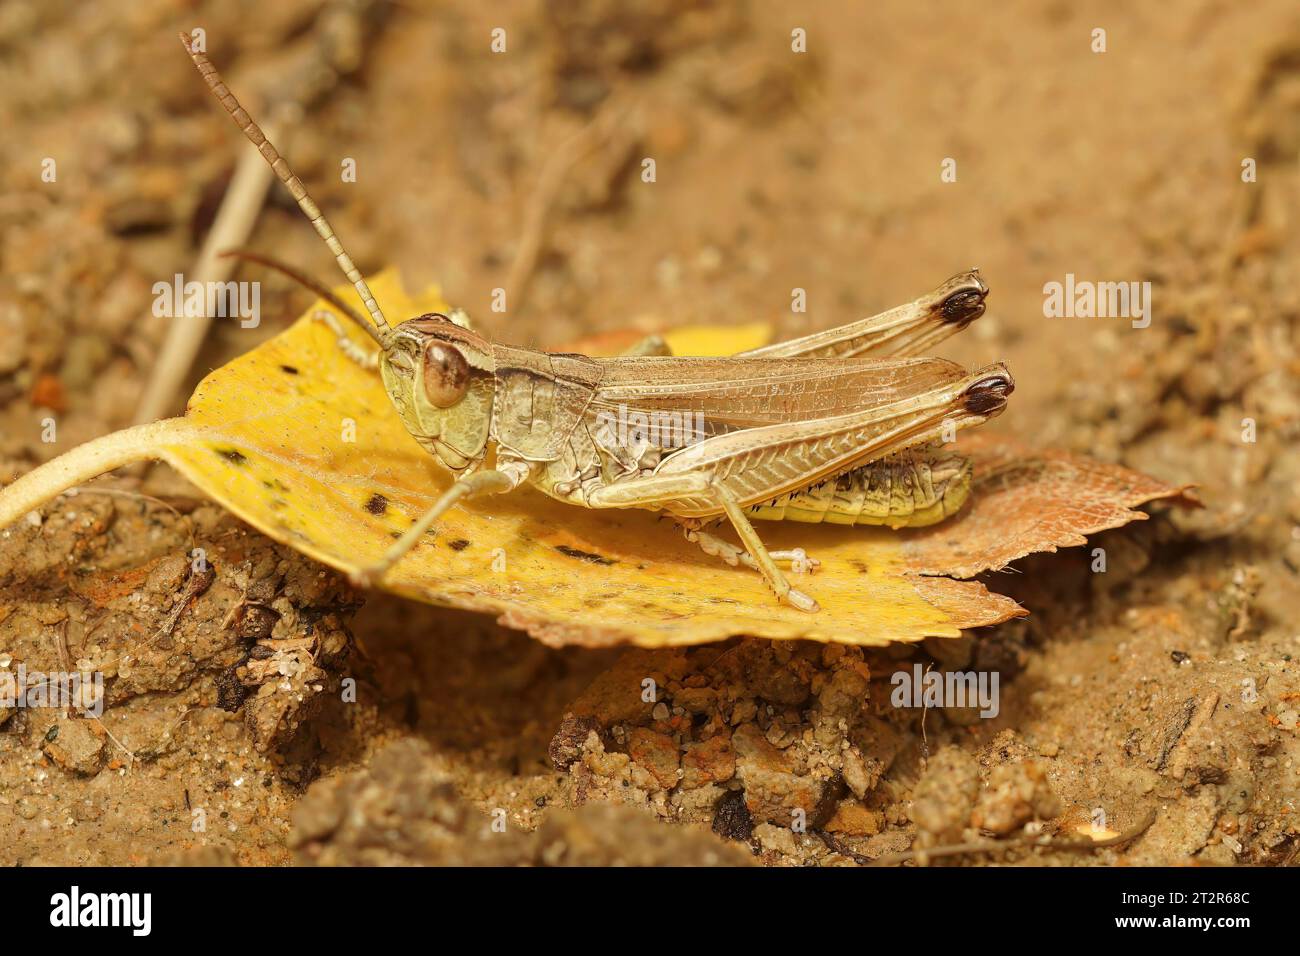 Natural closeup on the common or meadow grasshopper, Pseudochorthippus parallelus sitting on a fallen leaf Stock Photo